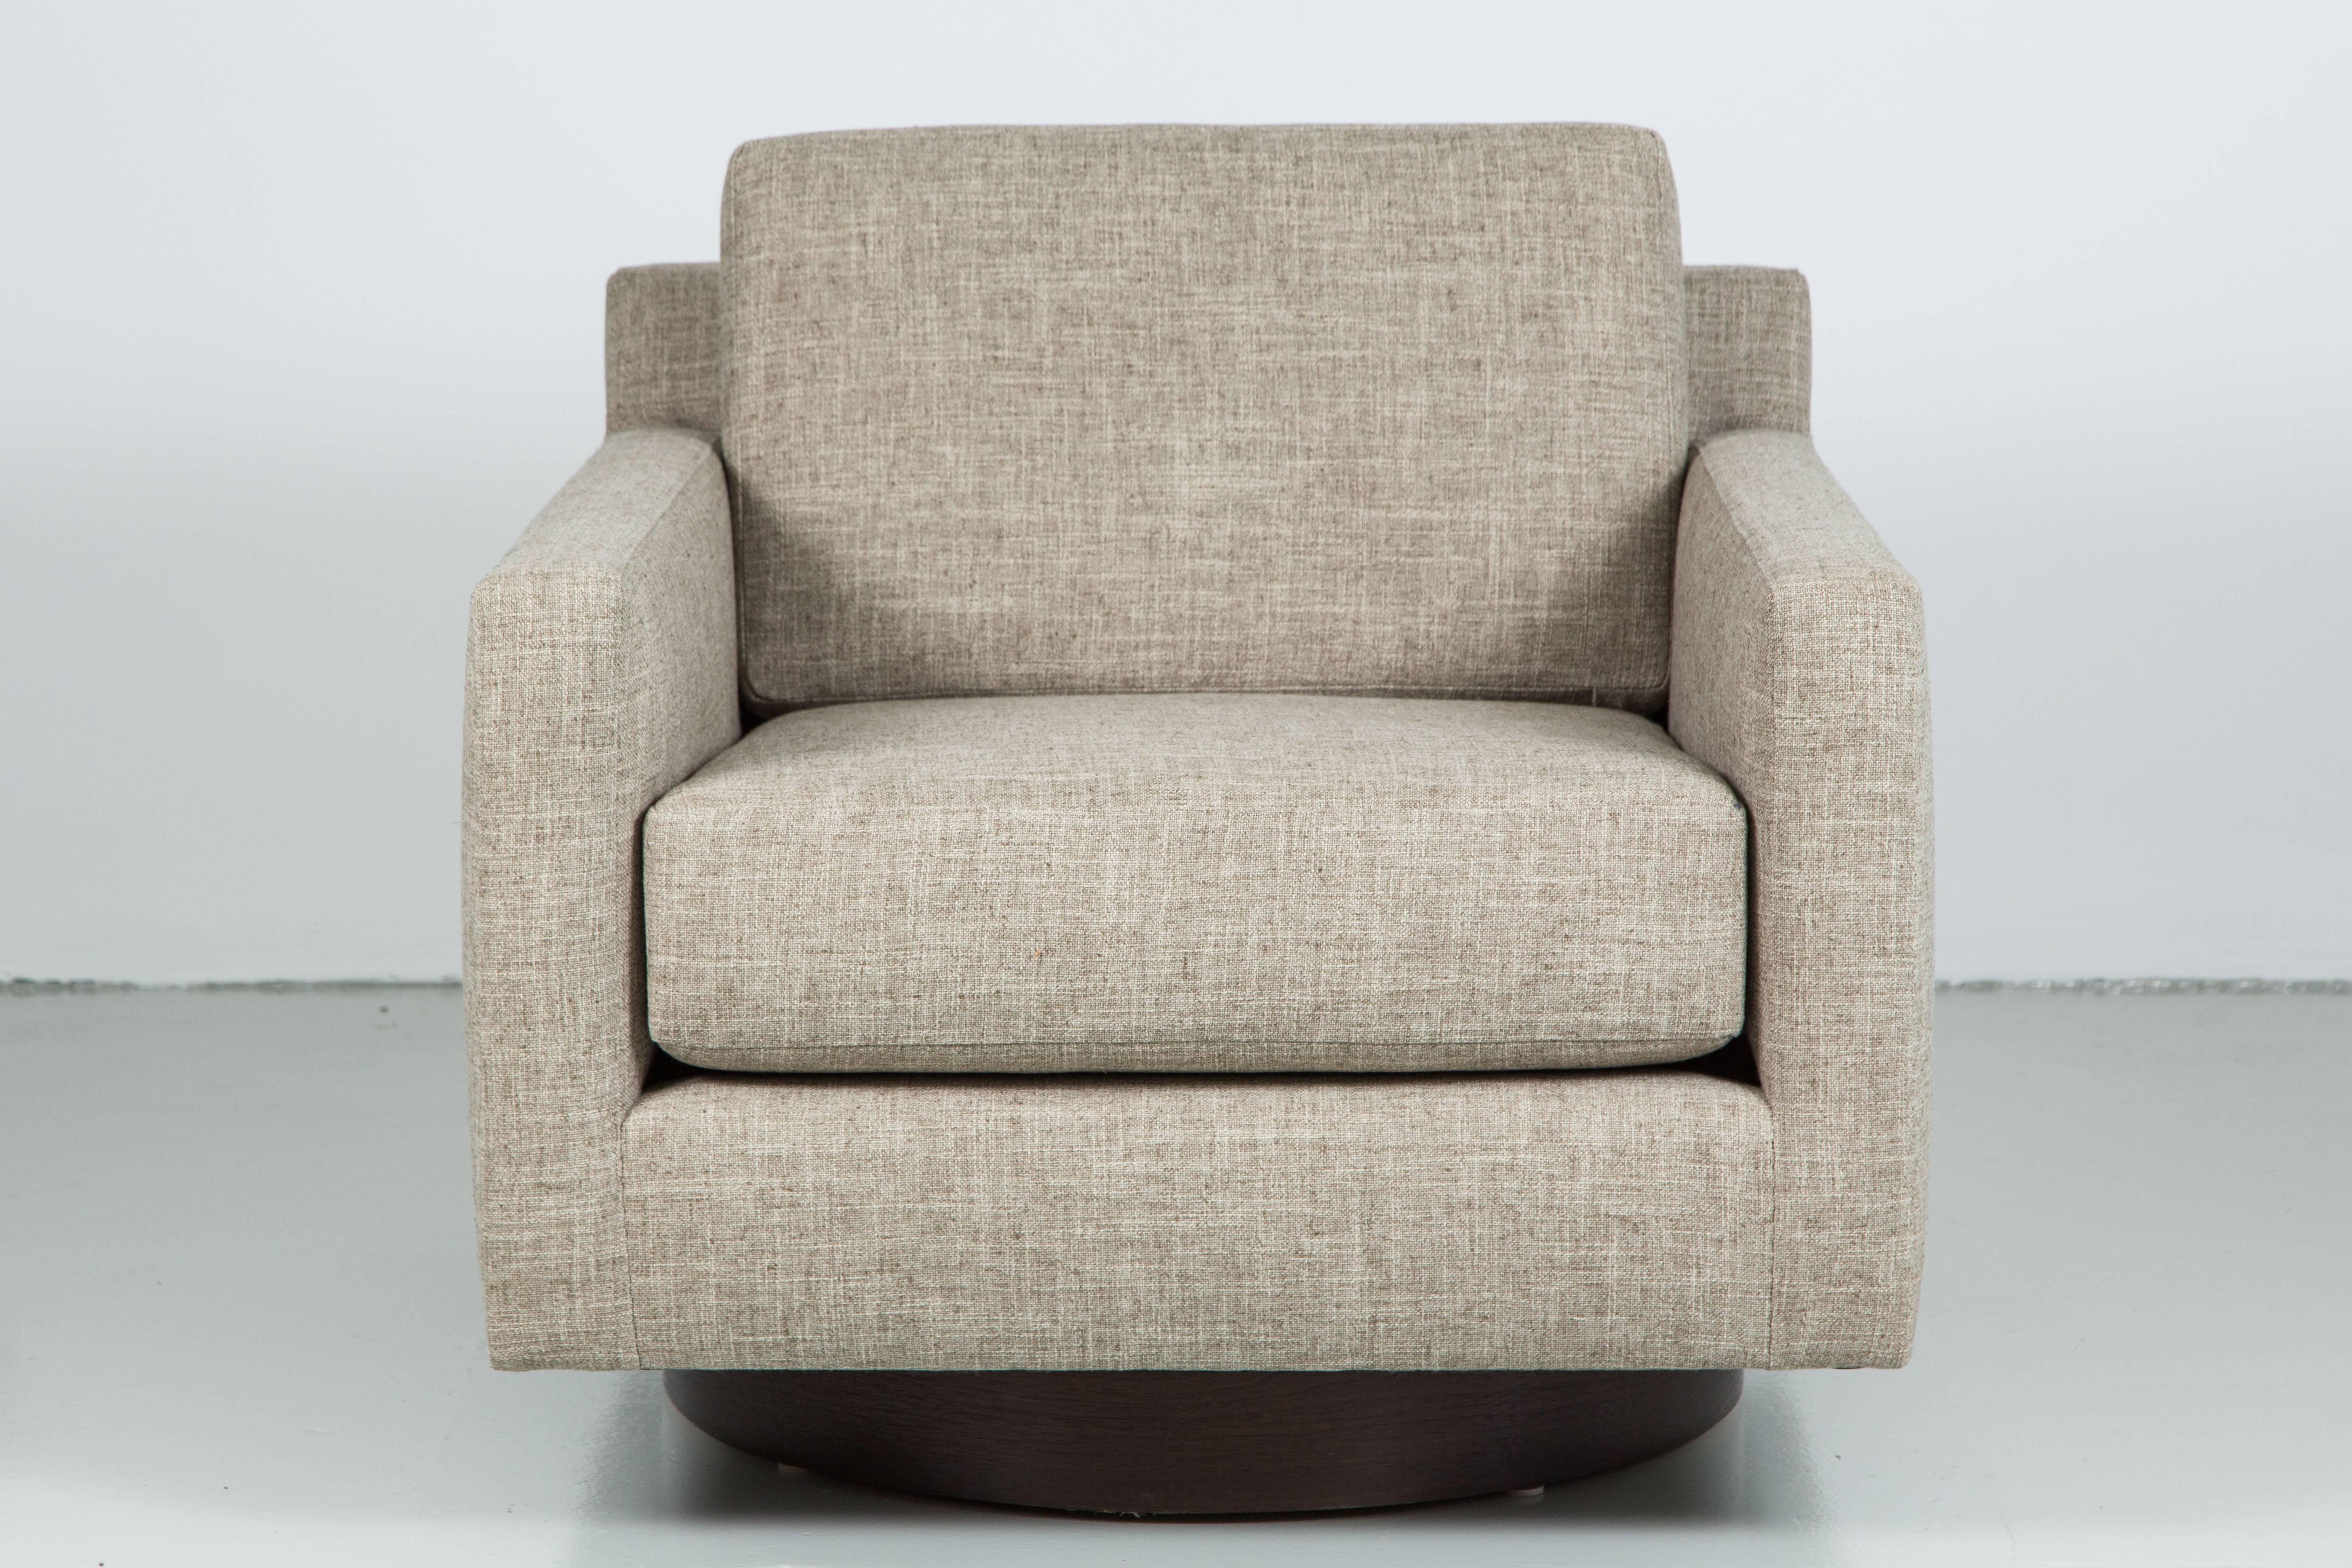 Fantastic pair of newly produced square swivel chairs in the style of Milo Baughman. Comfortable cushioned seats with low profile back cushion. Sits on walnut wood swivel base. 
Shown upholstered in a soft linen. 
Great modern design with sleek